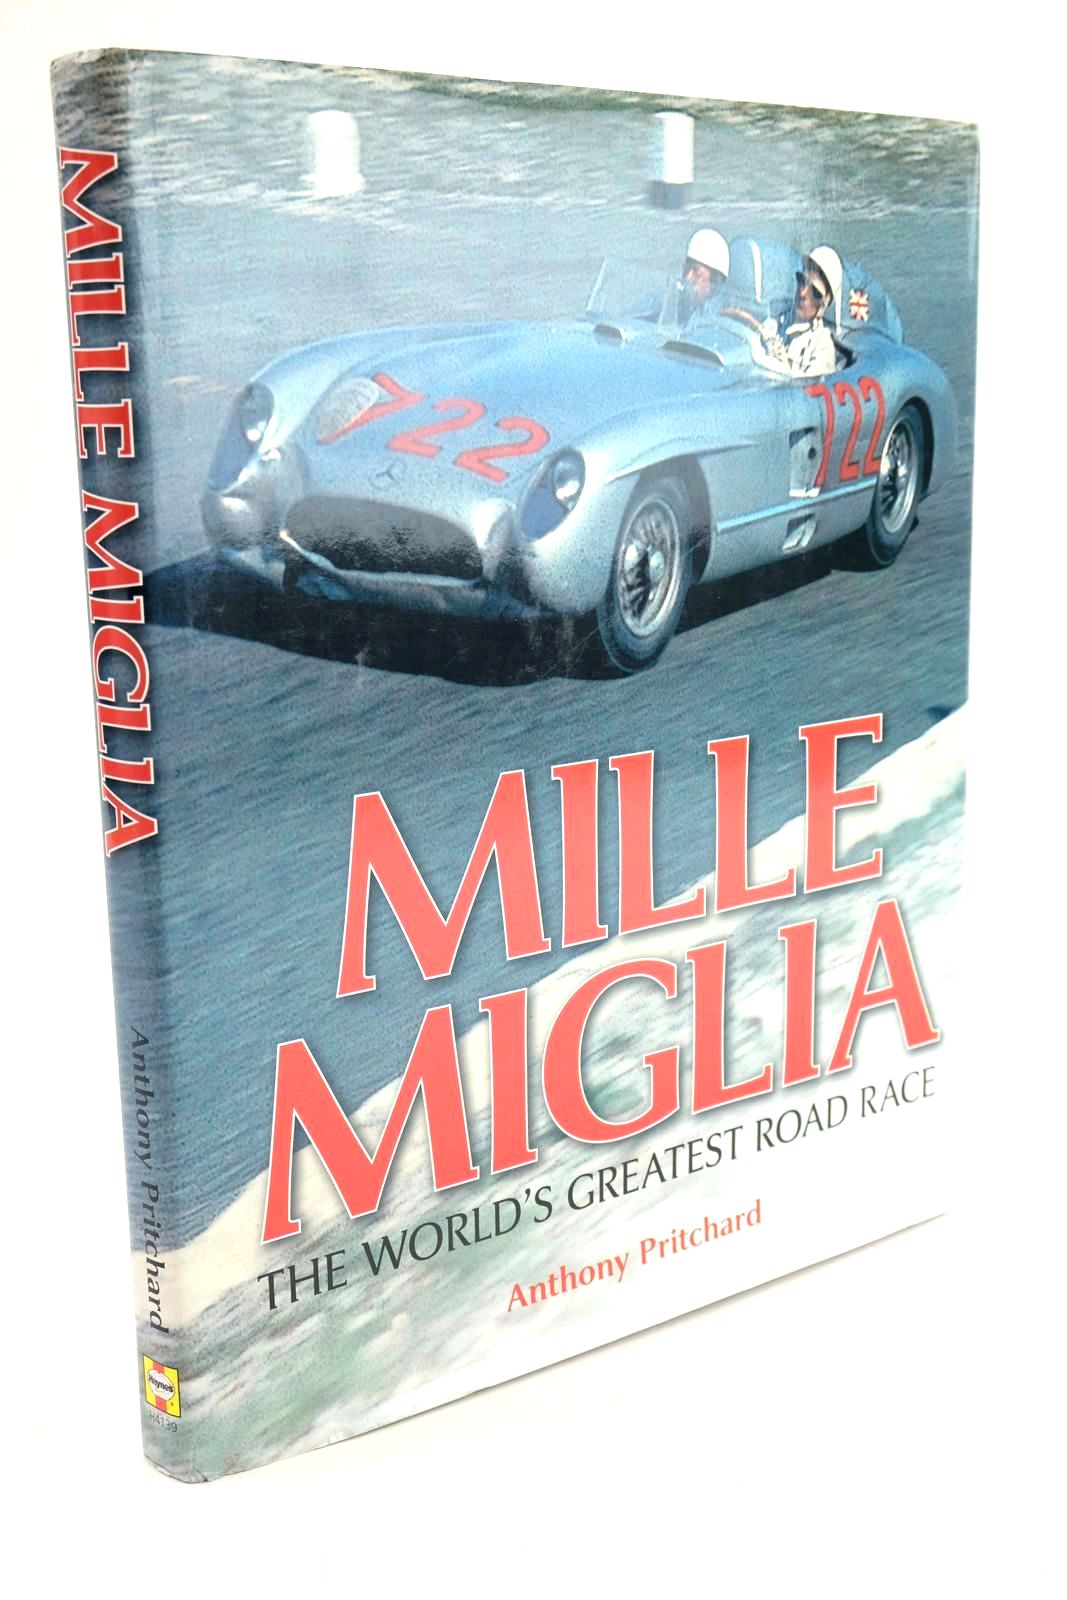 Photo of MILLE MIGLIA THE WORLD'S GREATEST ROAD RACE written by Pritchard, Anthony published by Haynes Publishing (STOCK CODE: 1324136)  for sale by Stella & Rose's Books